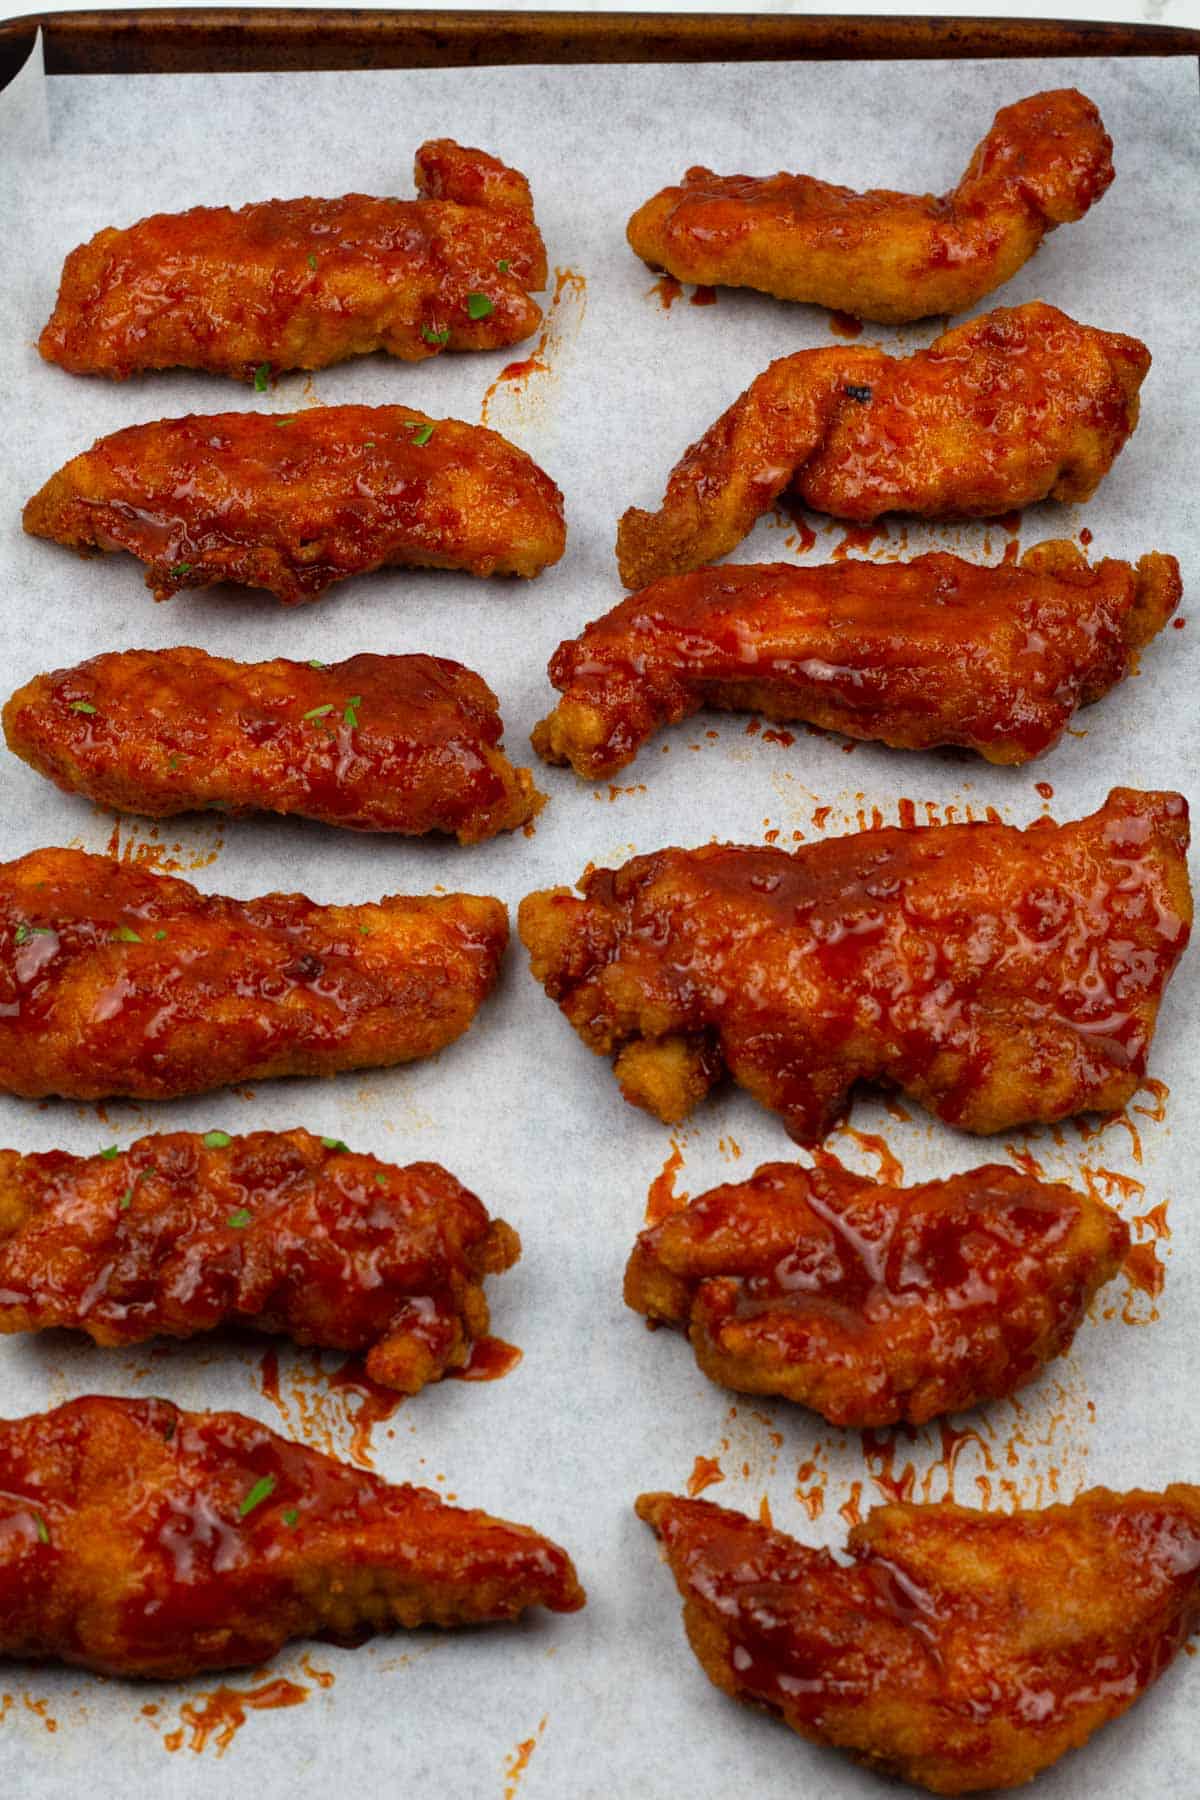 Chicken tenders for wrap baked and glazed with red heat-infused honey sauce.